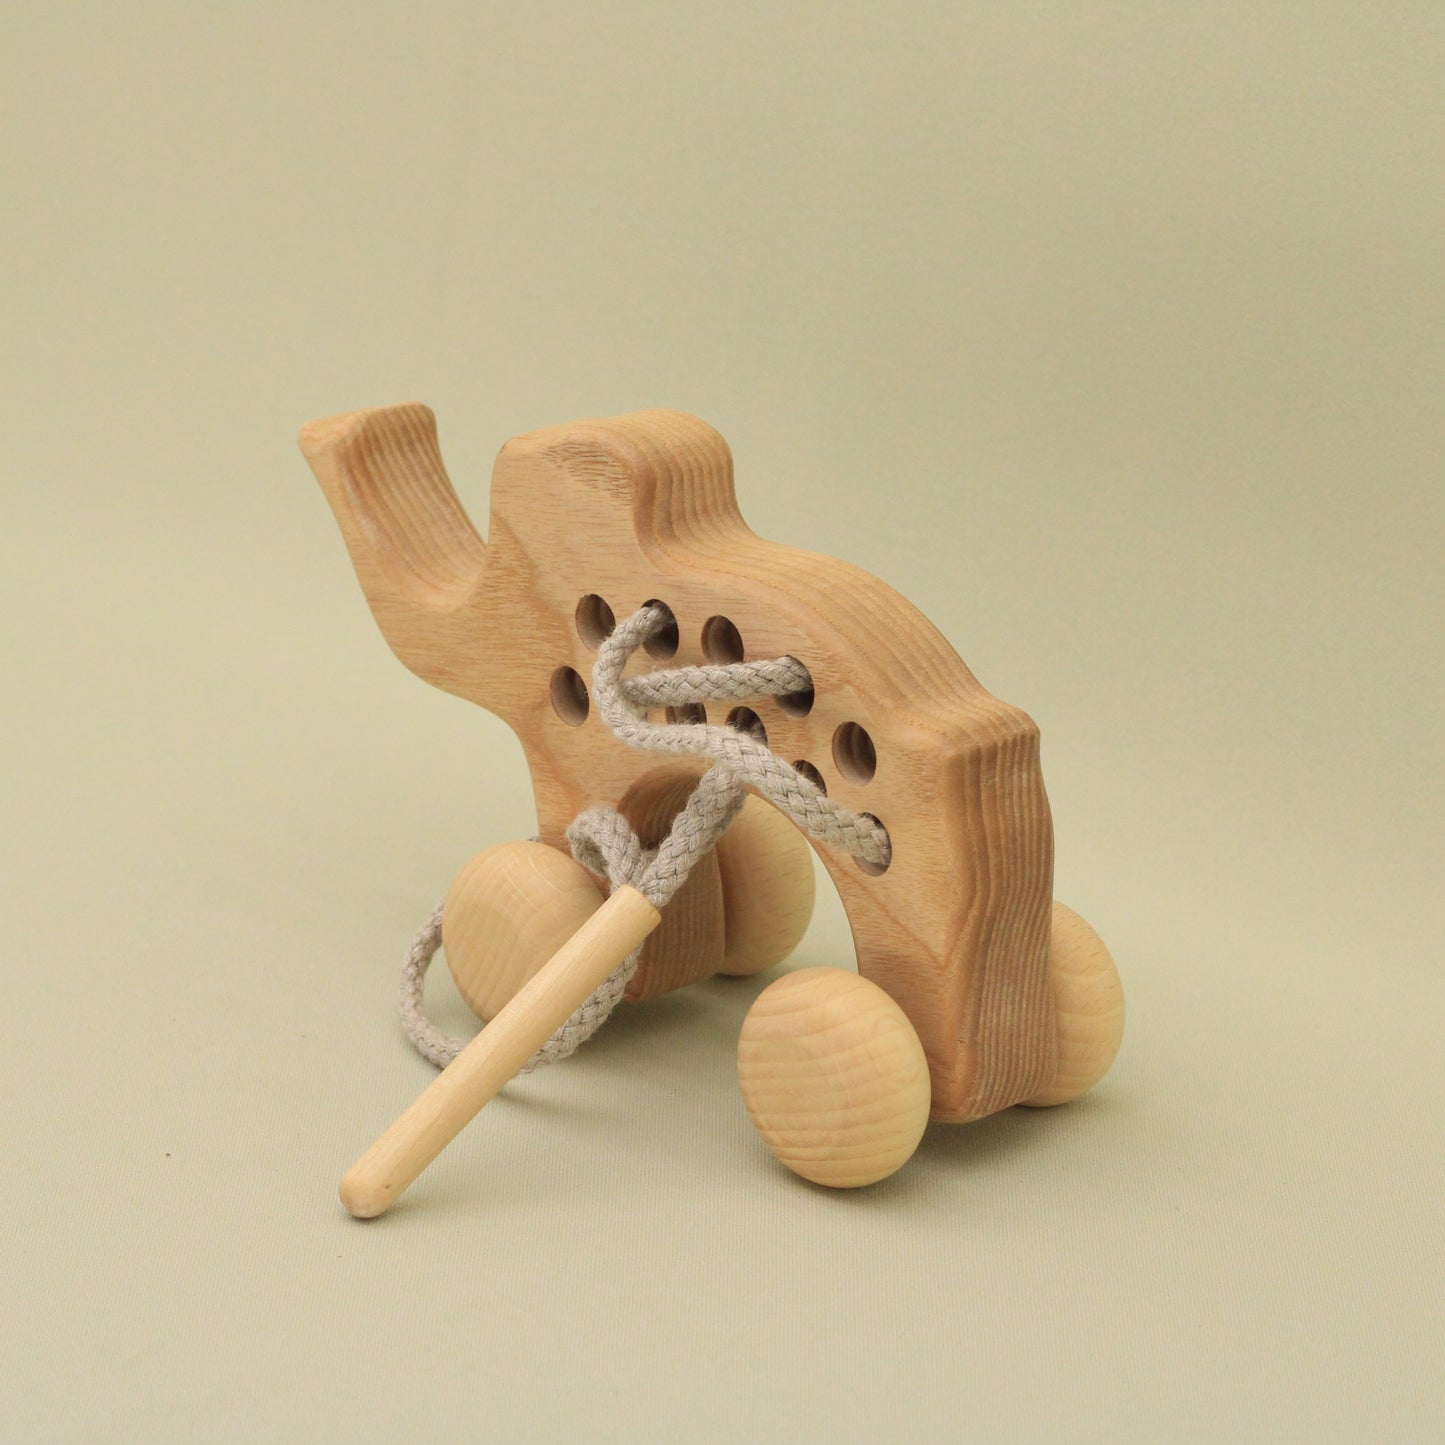 Lotes Toys Natural Wooden Threading Lacing Elephant TT56